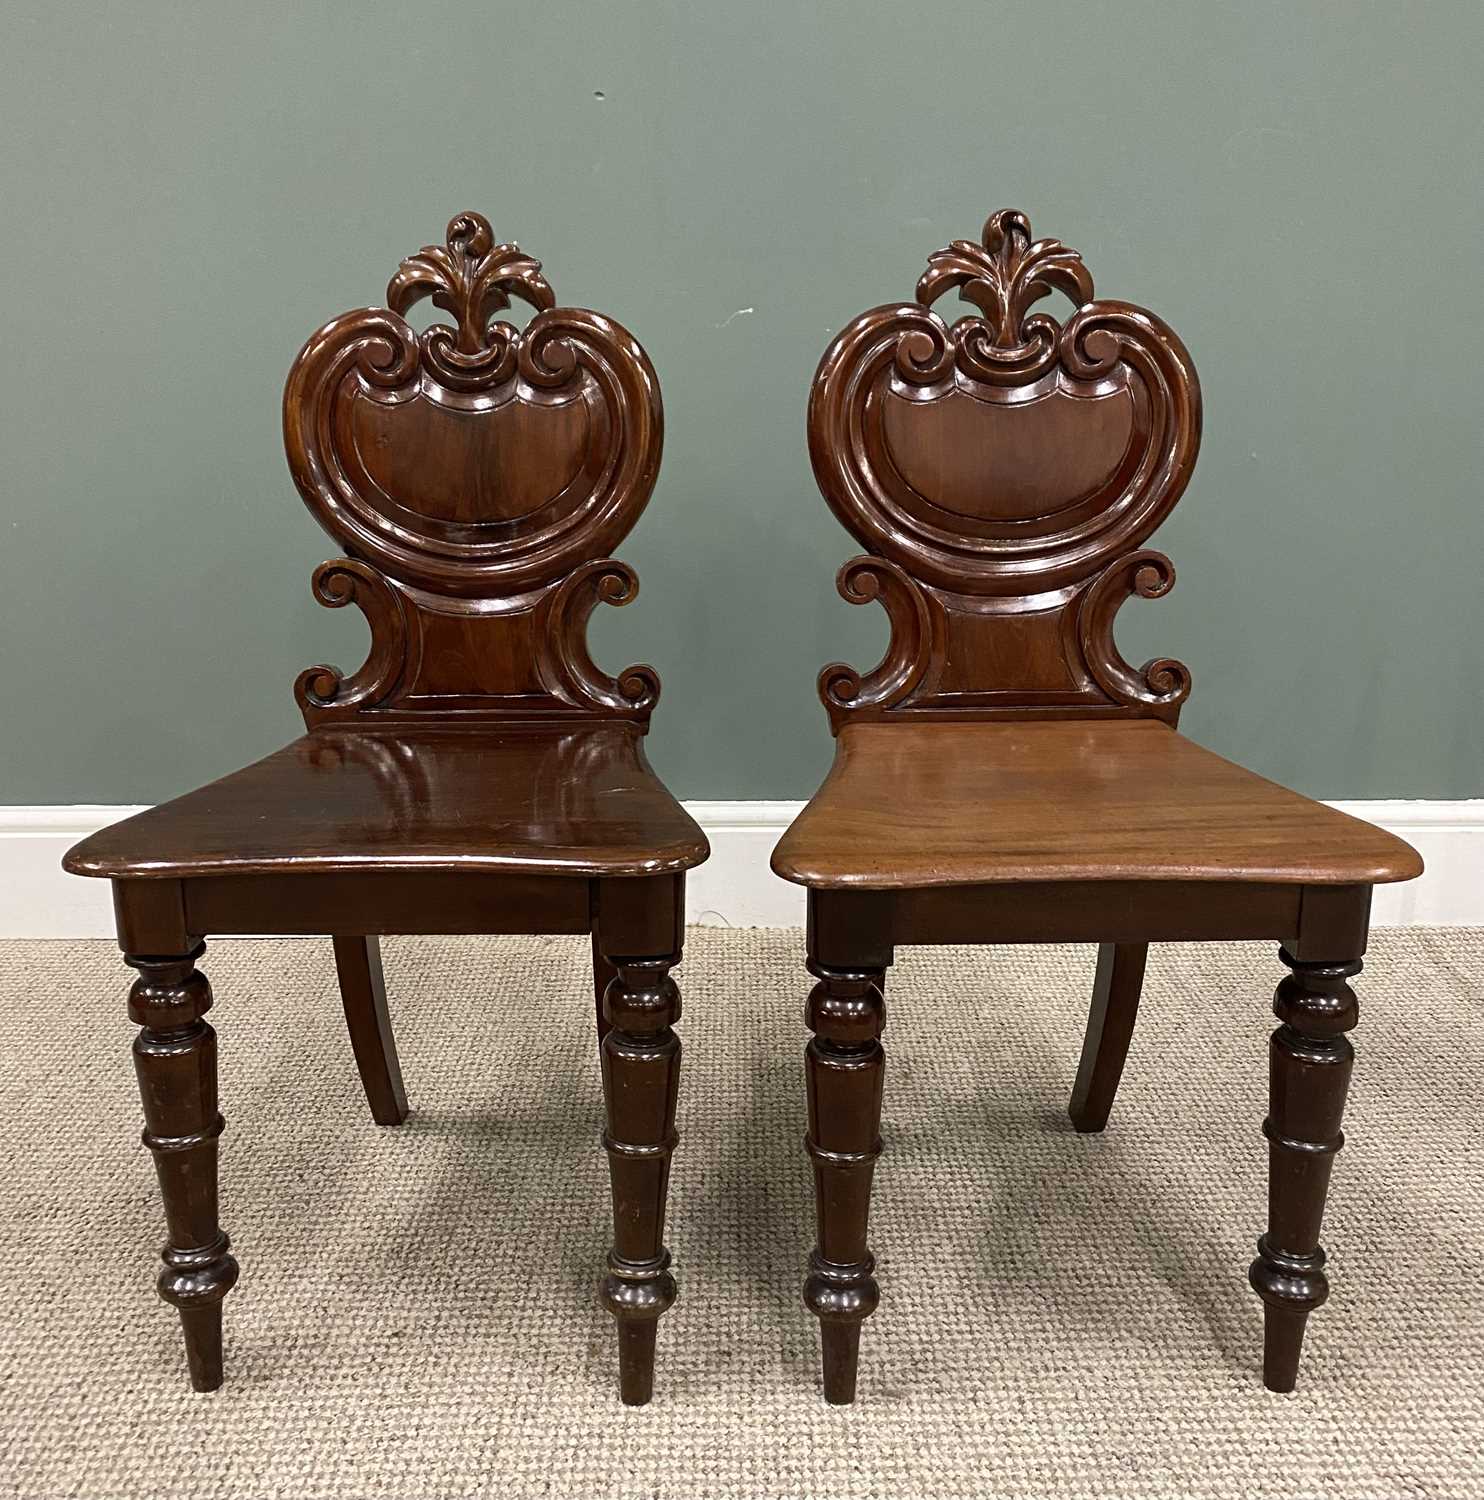 VERY NEAR PAIR OF VICTORIAN MAHOGANY HALL CHAIRS, having carved leaf crest and scrolled shield panel